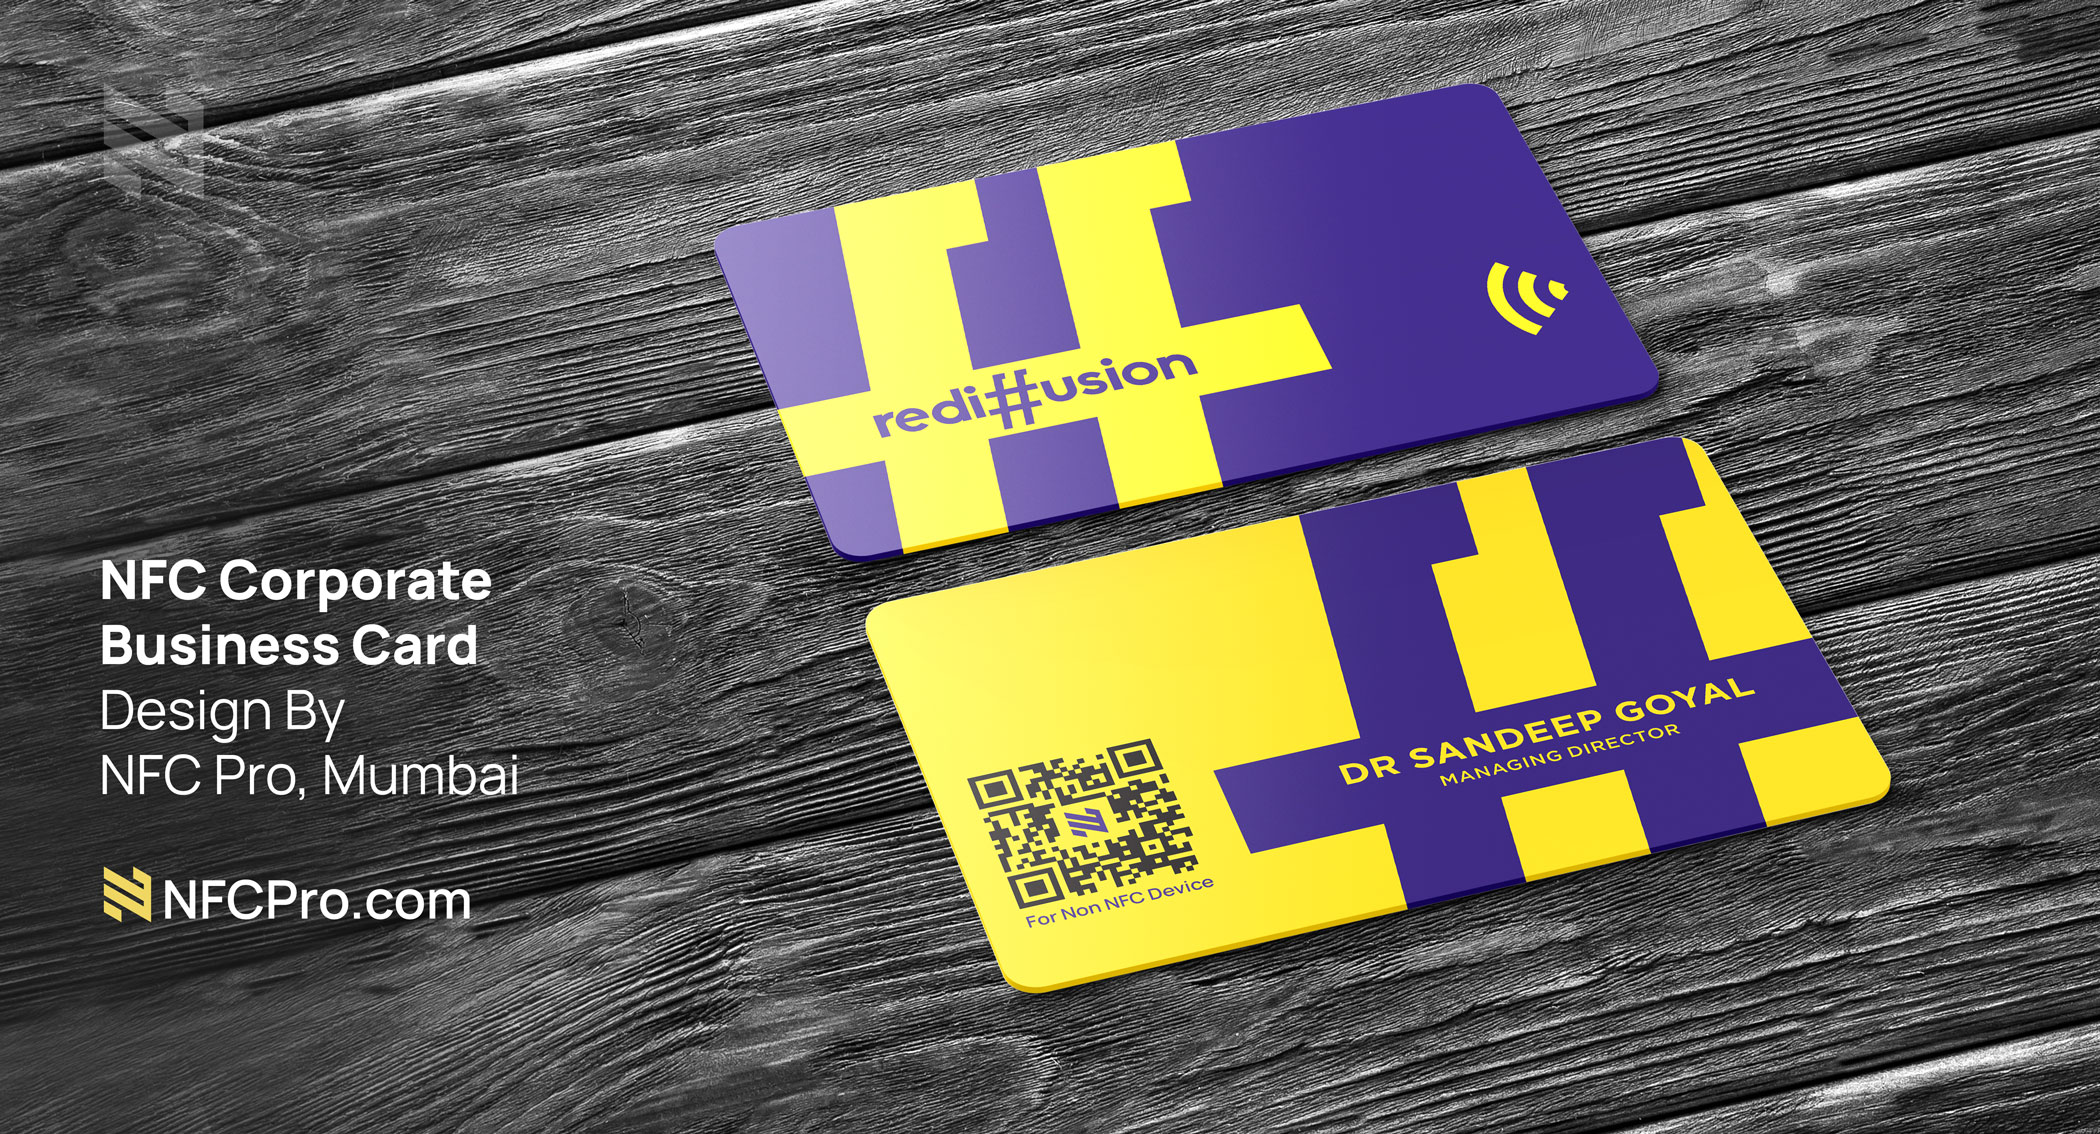 NFC Business Card Design and Printing For Rediffusion Brand Solutions by NFC Pro